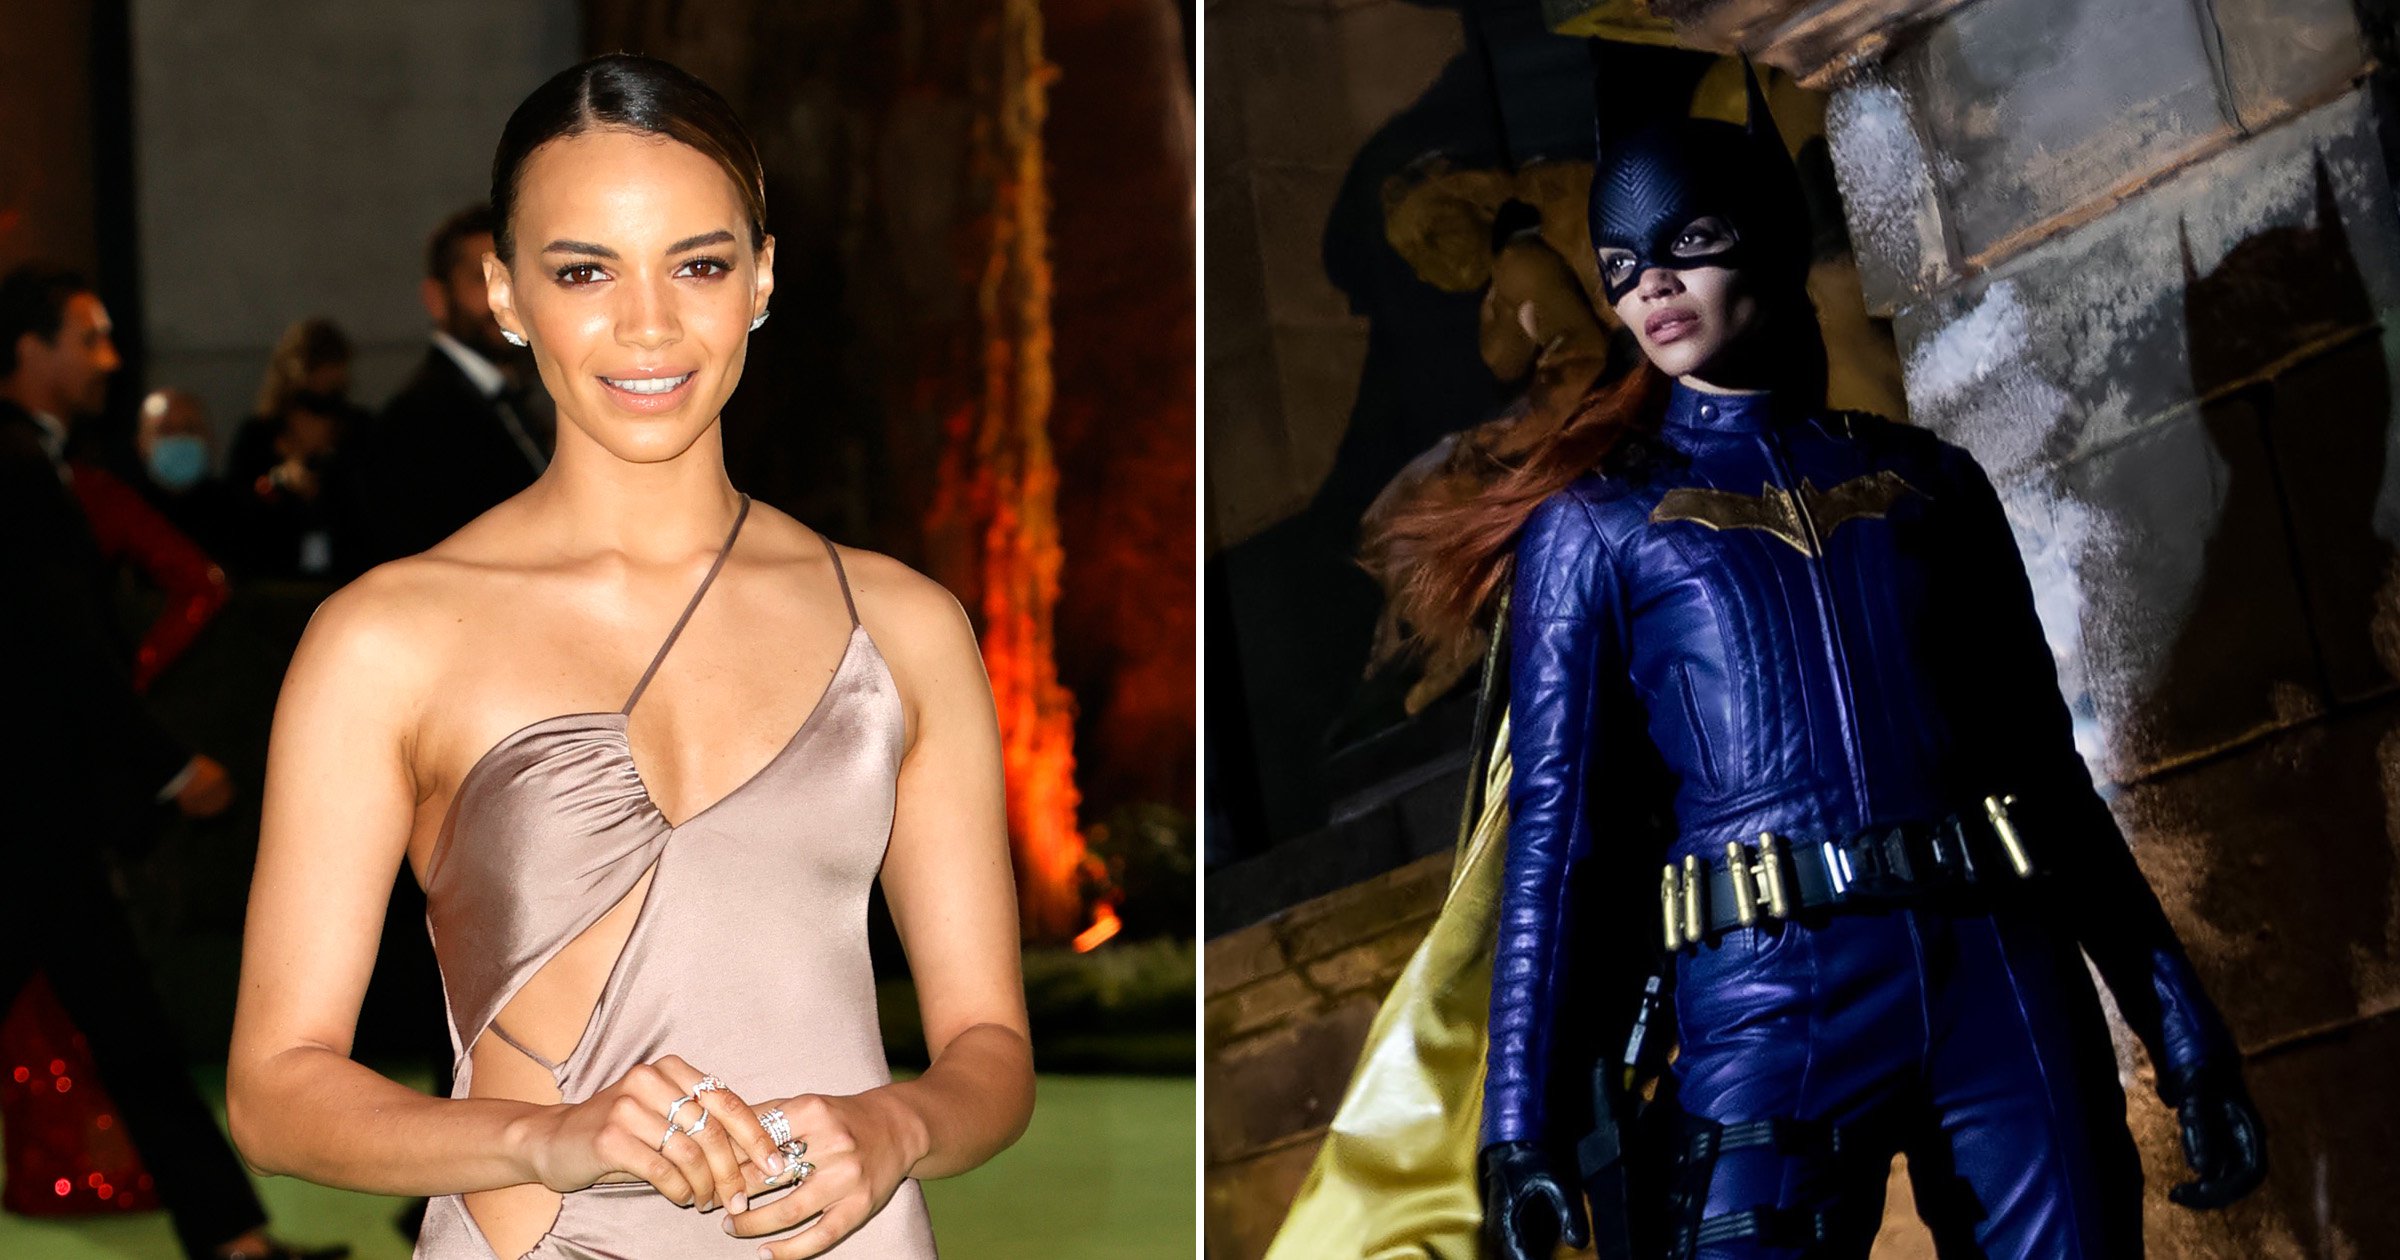 Leslie Grace seen rocking Batgirl costume for the first time during filming in Glasgow